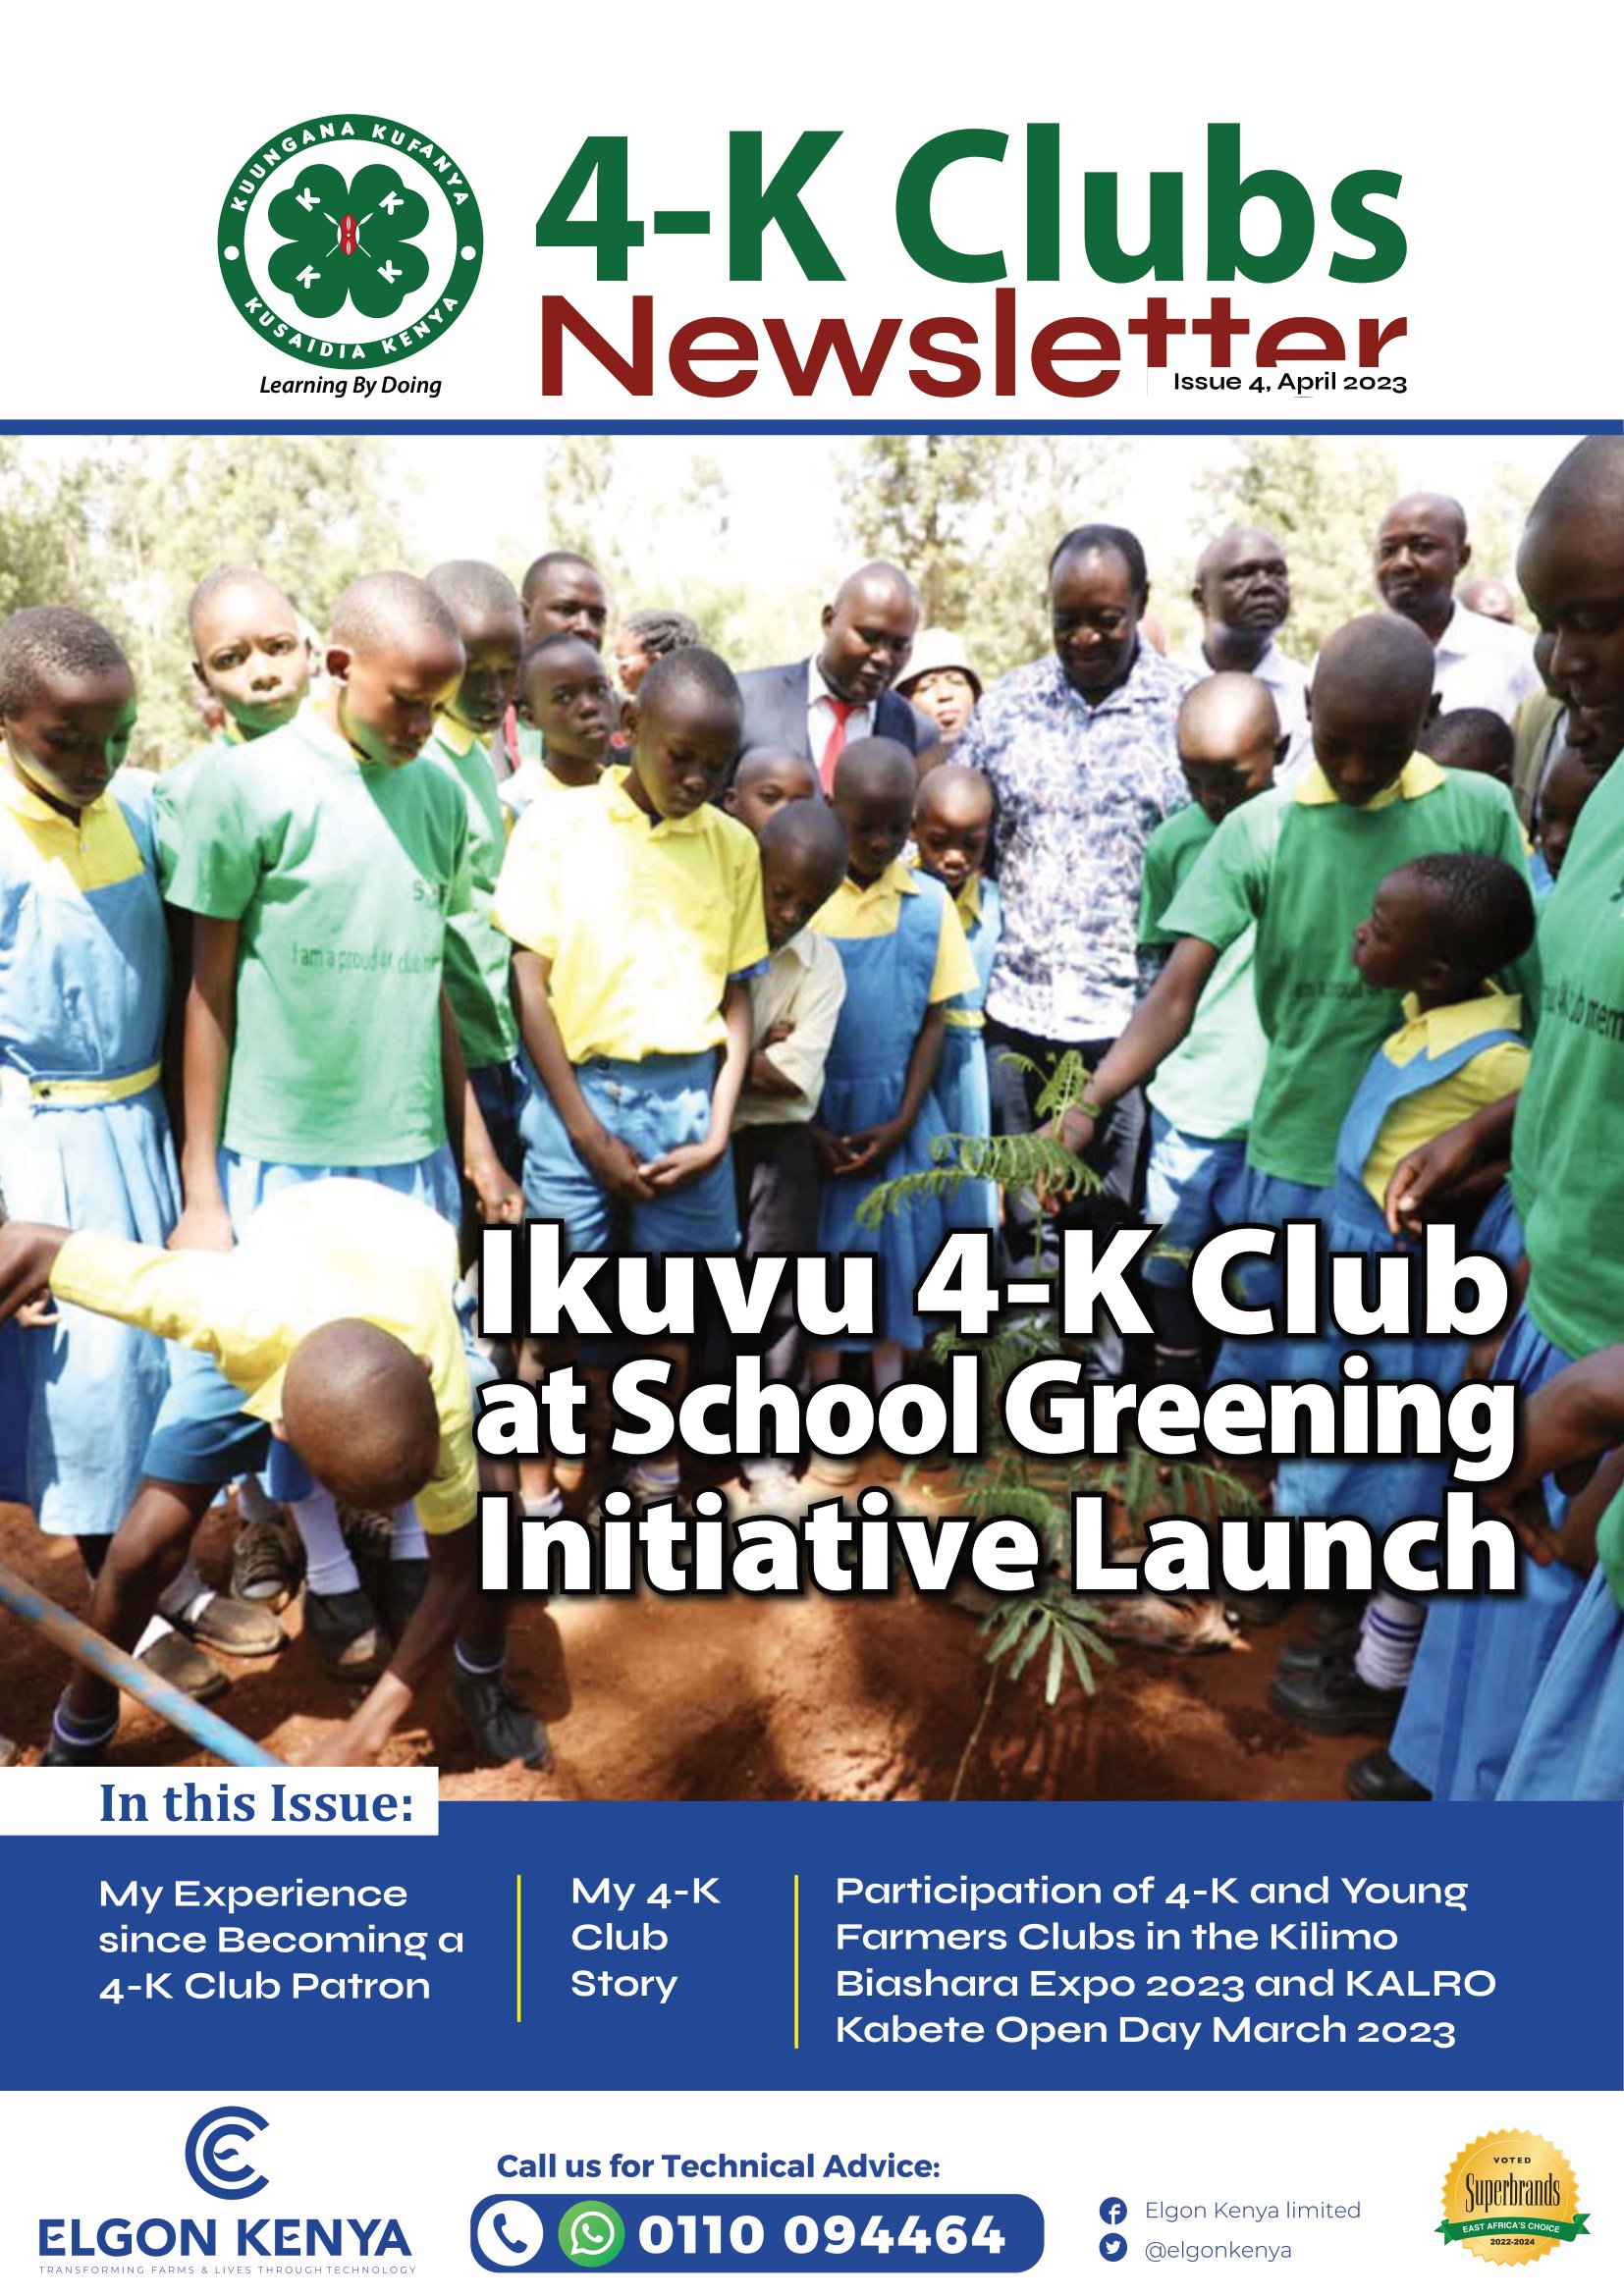 4-K Clubs Newsletter Issue 4 April 2023